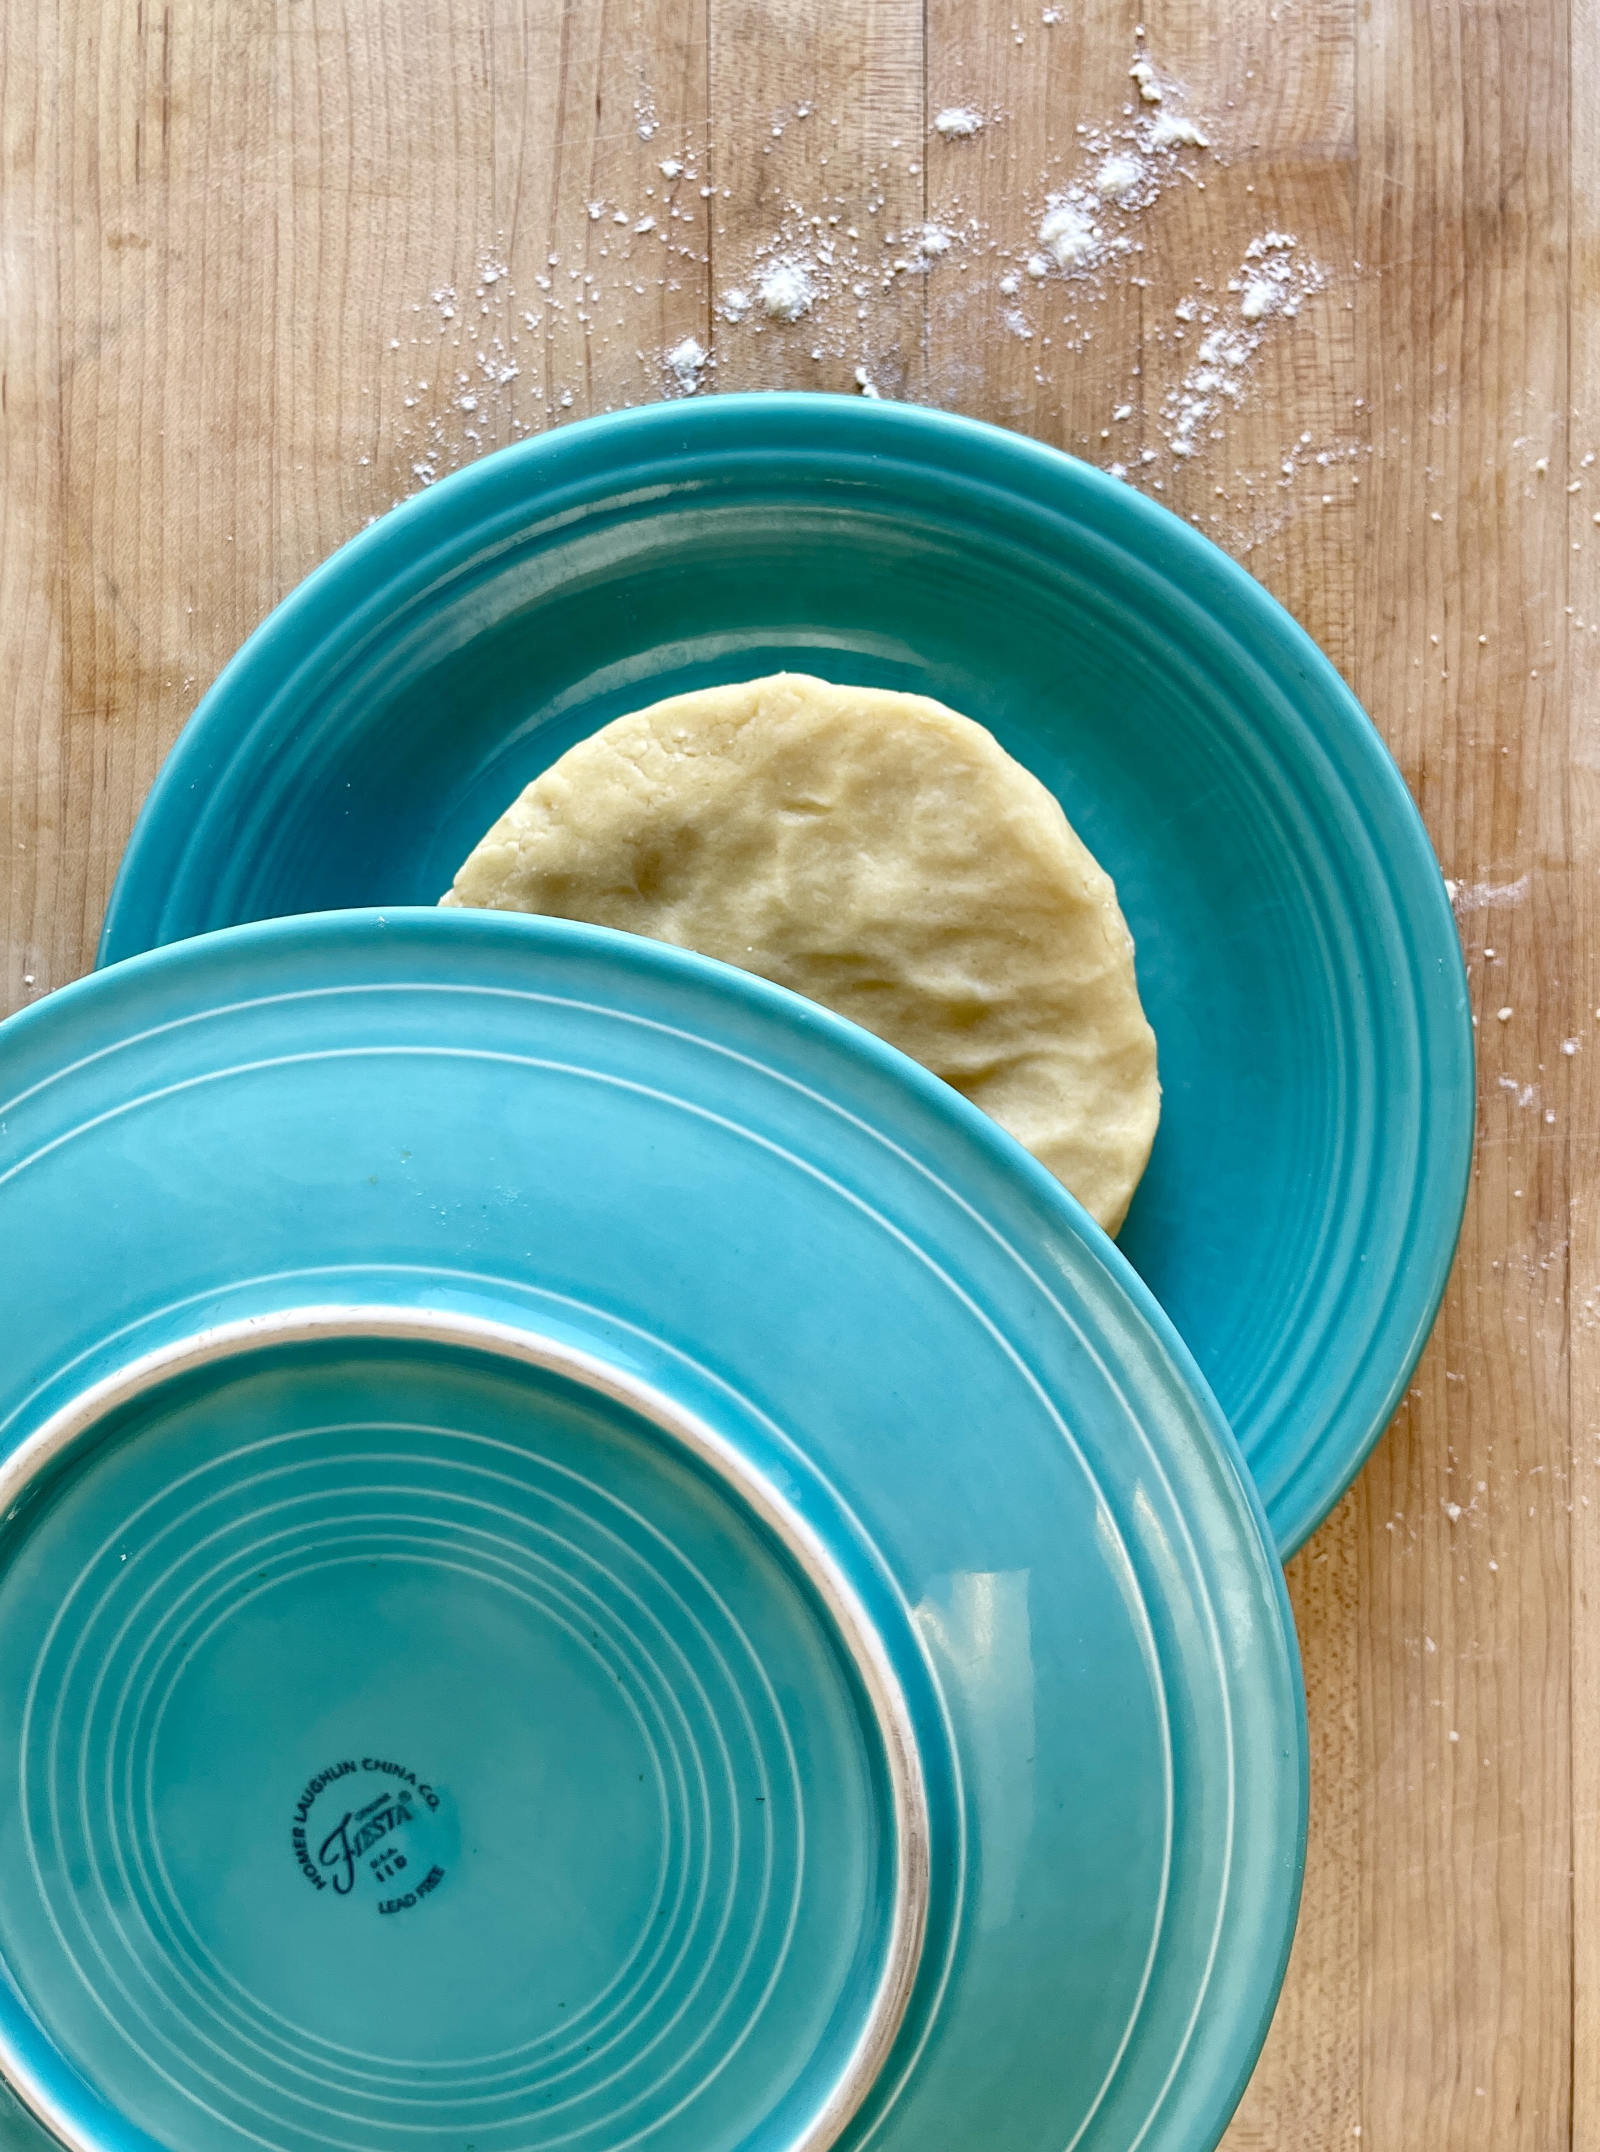 An inverted turquoise Fiesta Ware plate is about to cover another turquoise plate holding a disk of semolina pastry